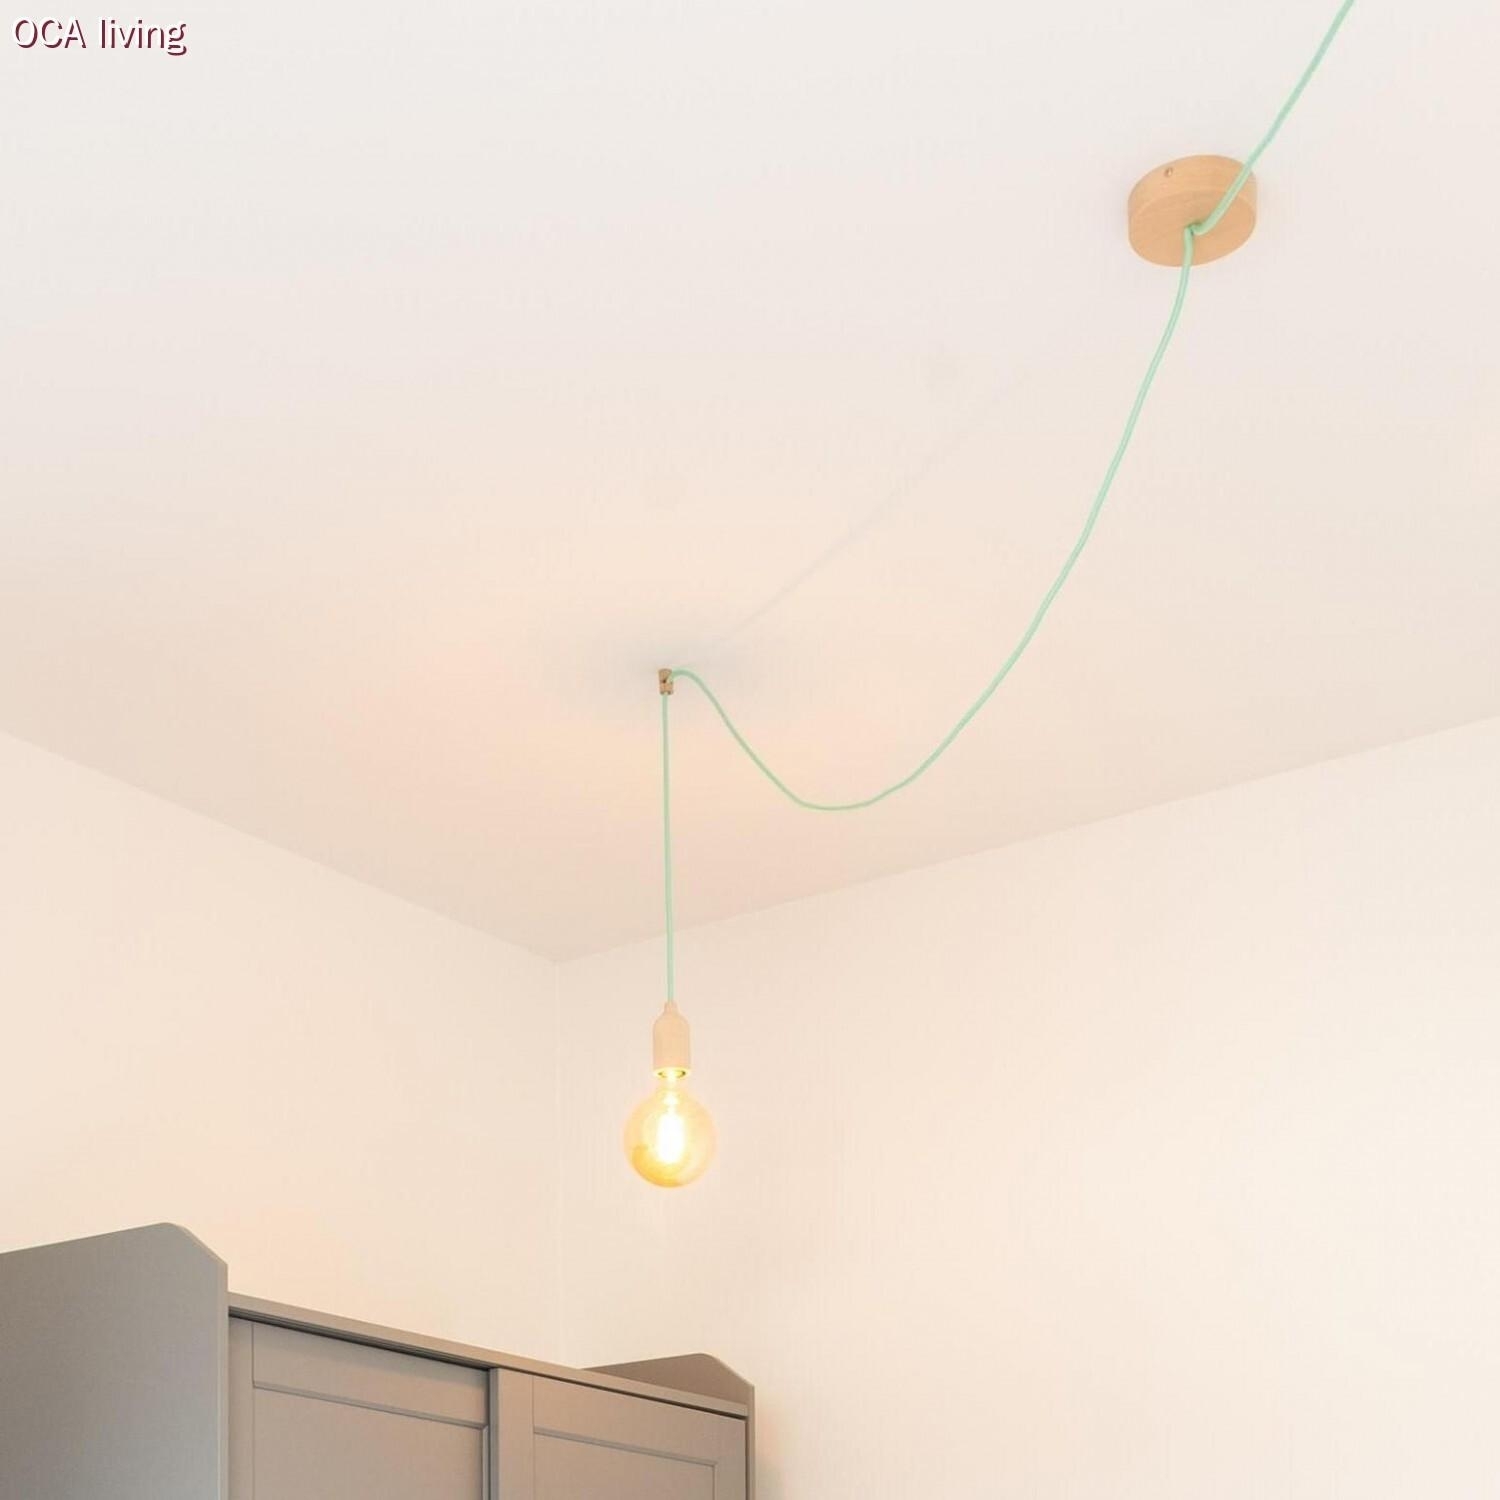 https://www.creative-cables.us/106277-big_default/decentralizer-fabric-cable-wooden-ceiling-or-wall-v-hook.jpg